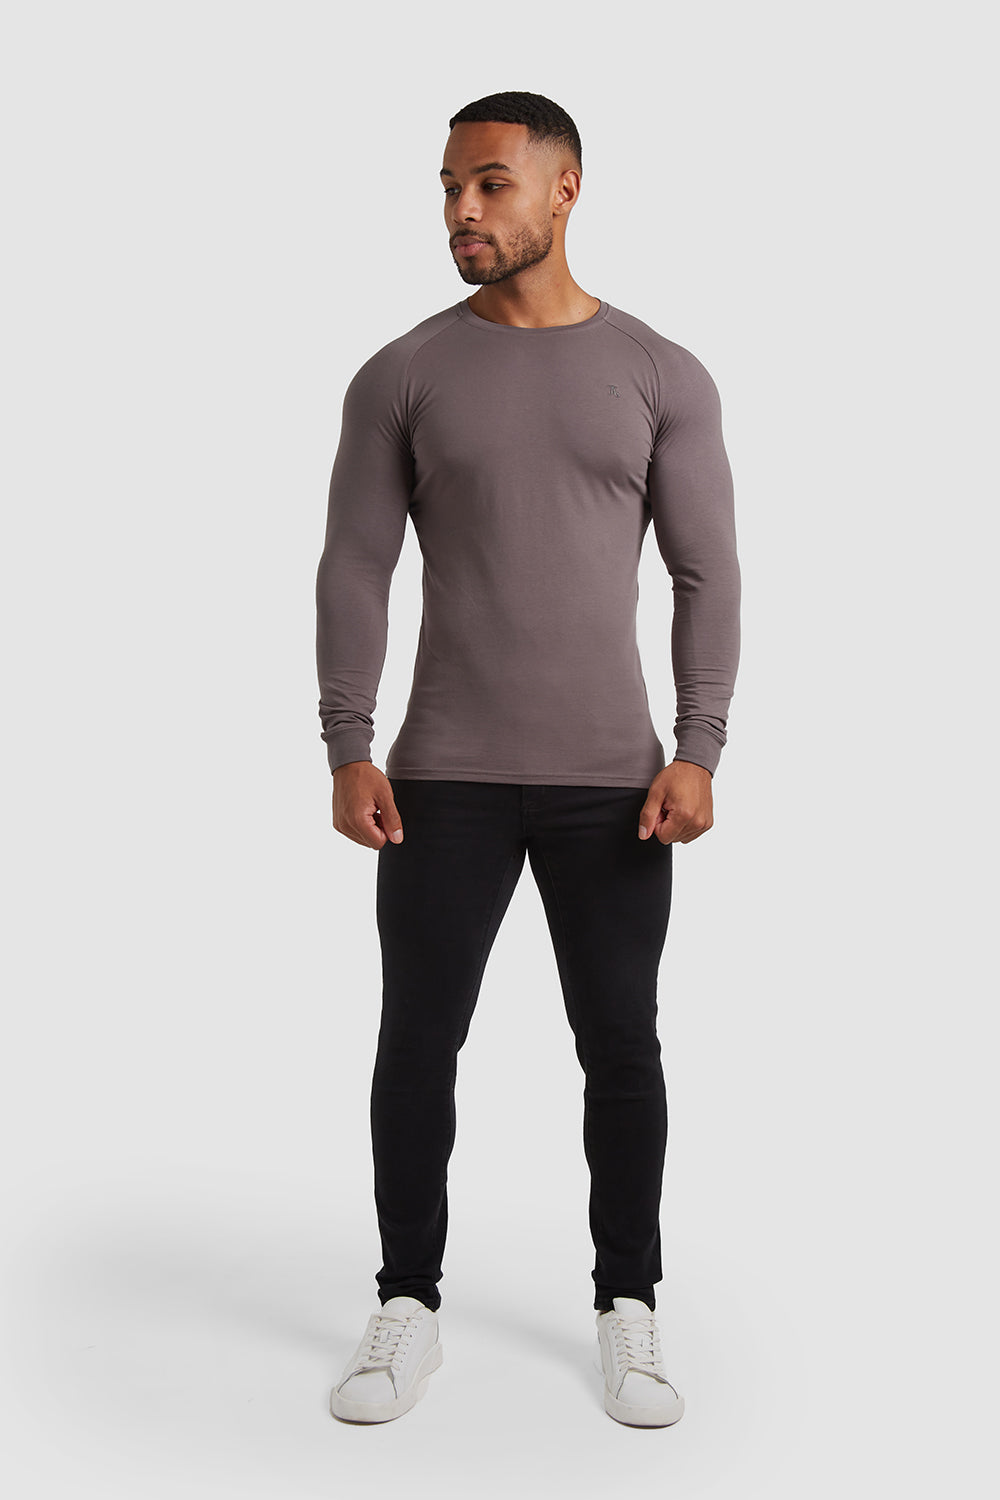 Muscle Fit T-Shirt in Mole - TAILORED ATHLETE - ROW